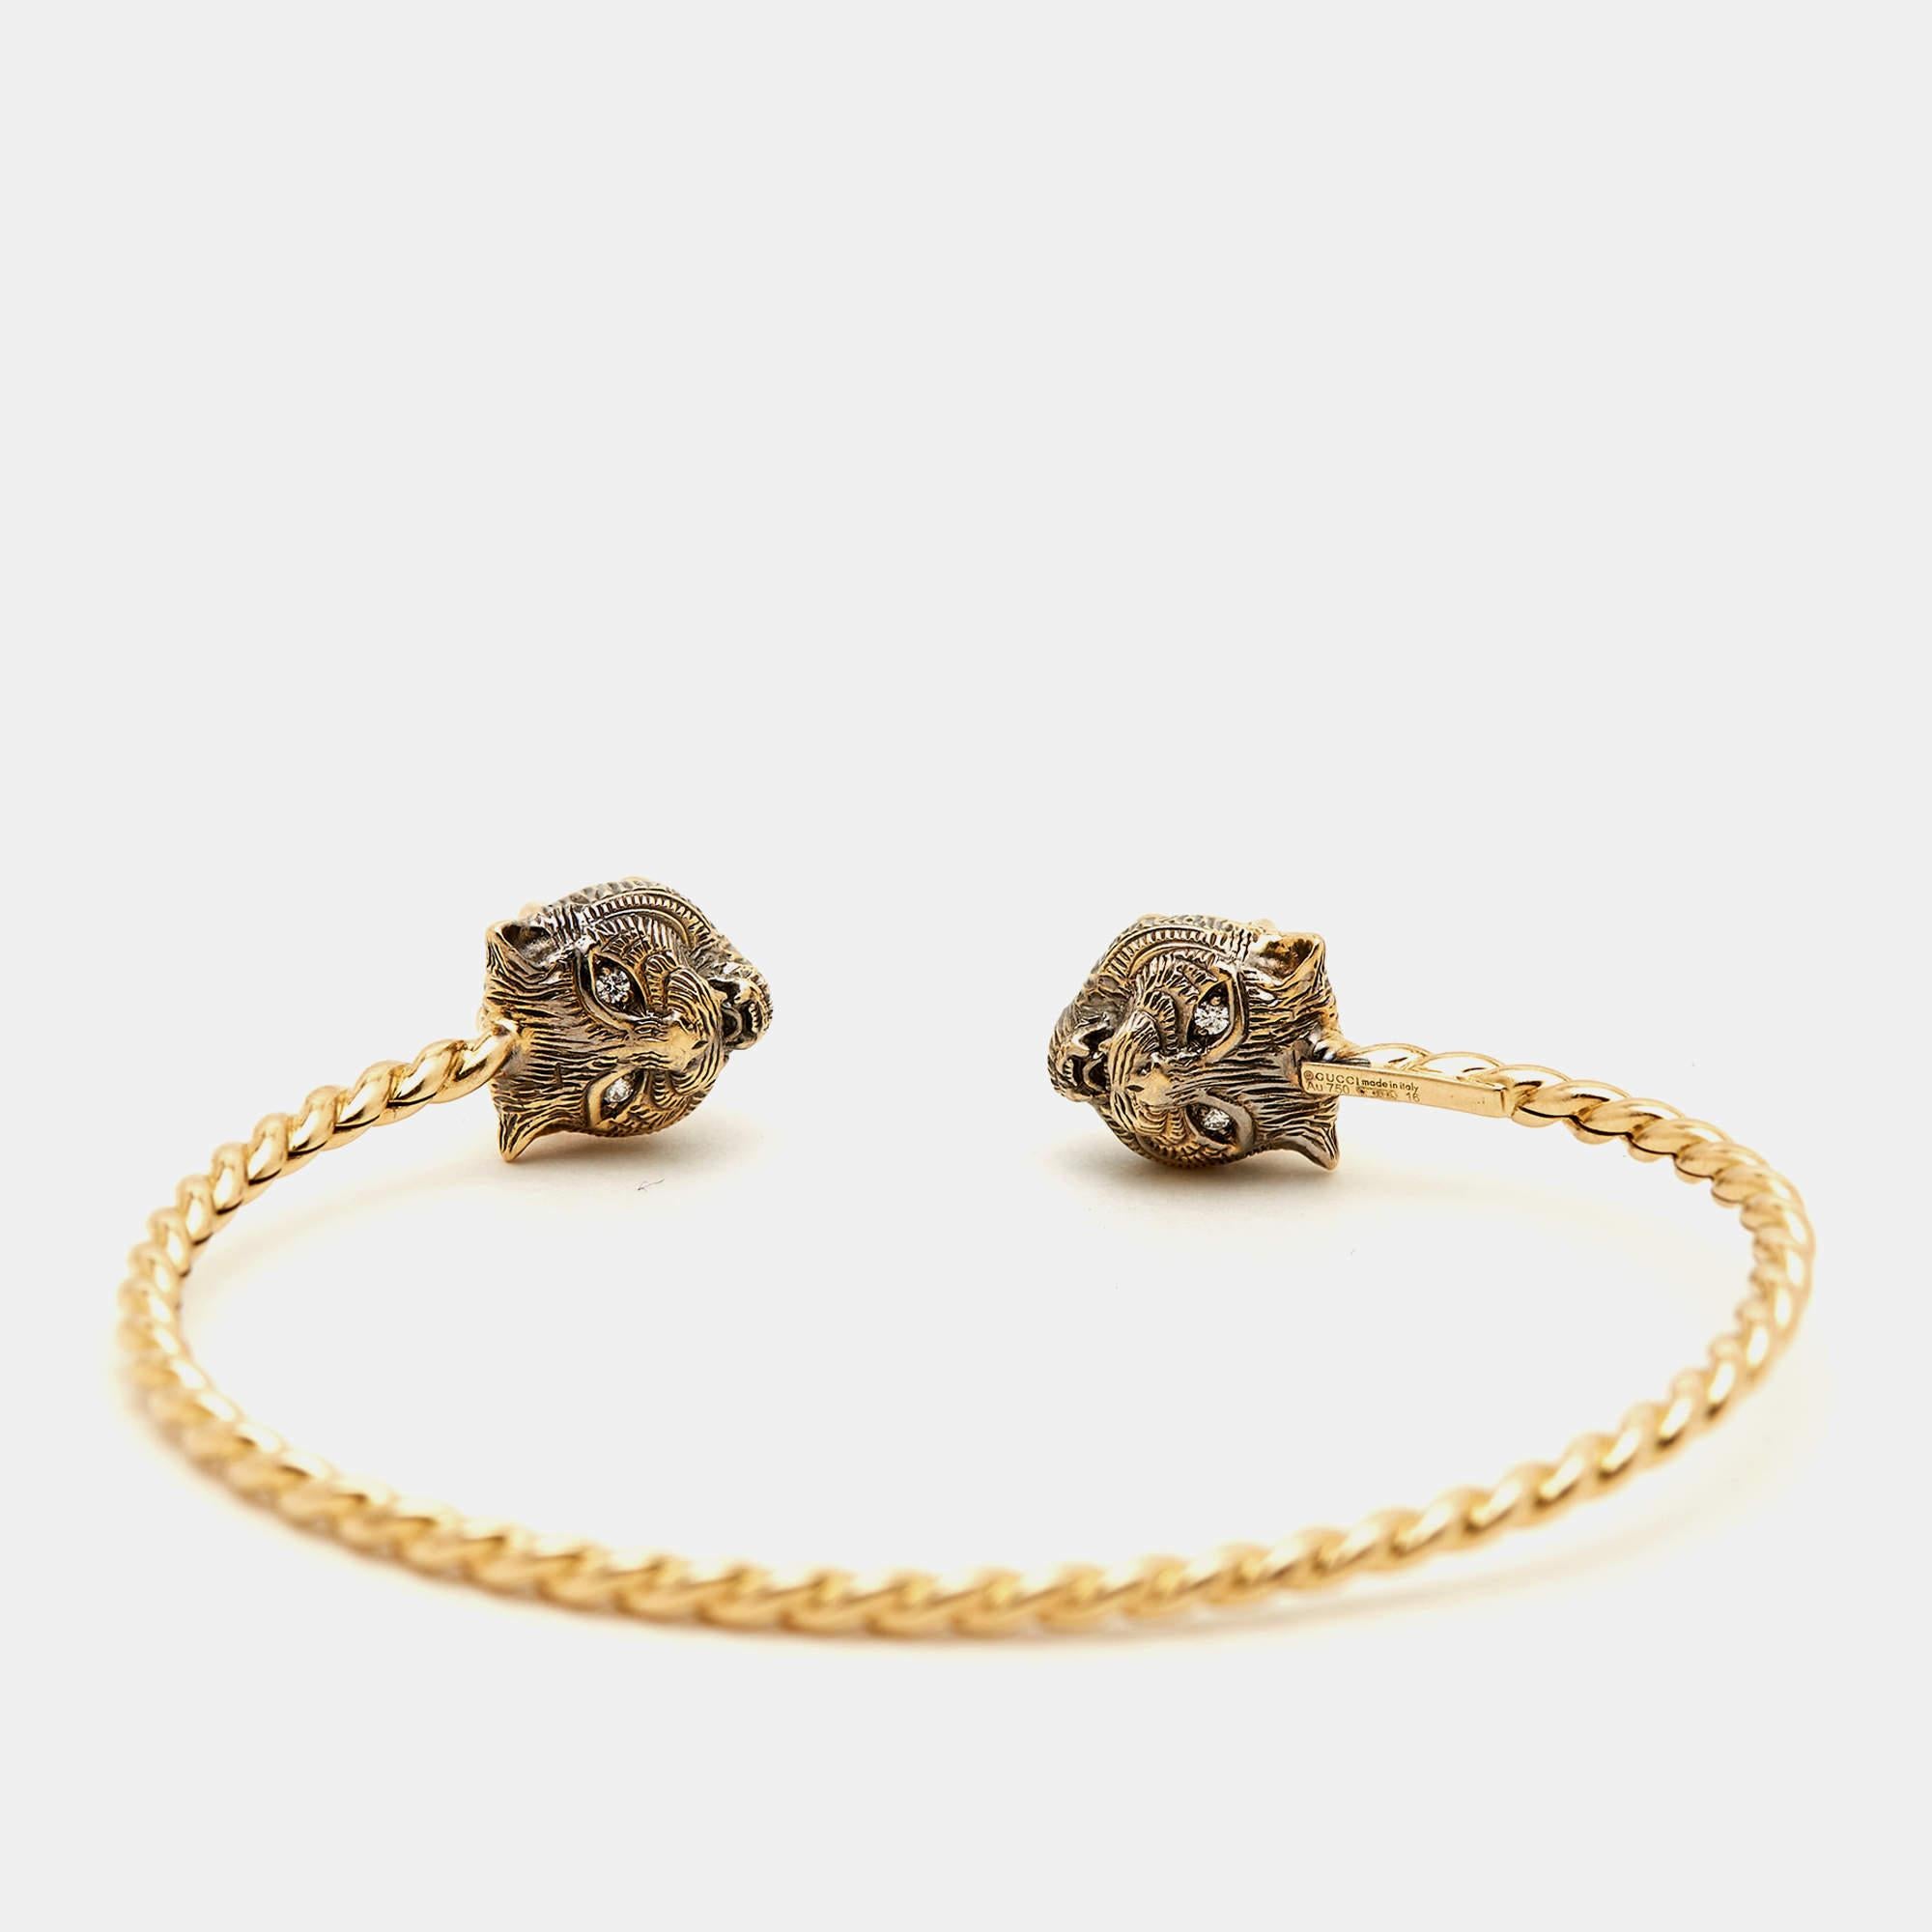 The Gucci Marche des Merveilles Feline cuff bracelet is a luxurious and captivating piece of jewelry. Crafted from 18K yellow gold, it features intricate feline head motifs adorned with sparkling diamonds, aquamarine, and pink tourmaline gemstones.